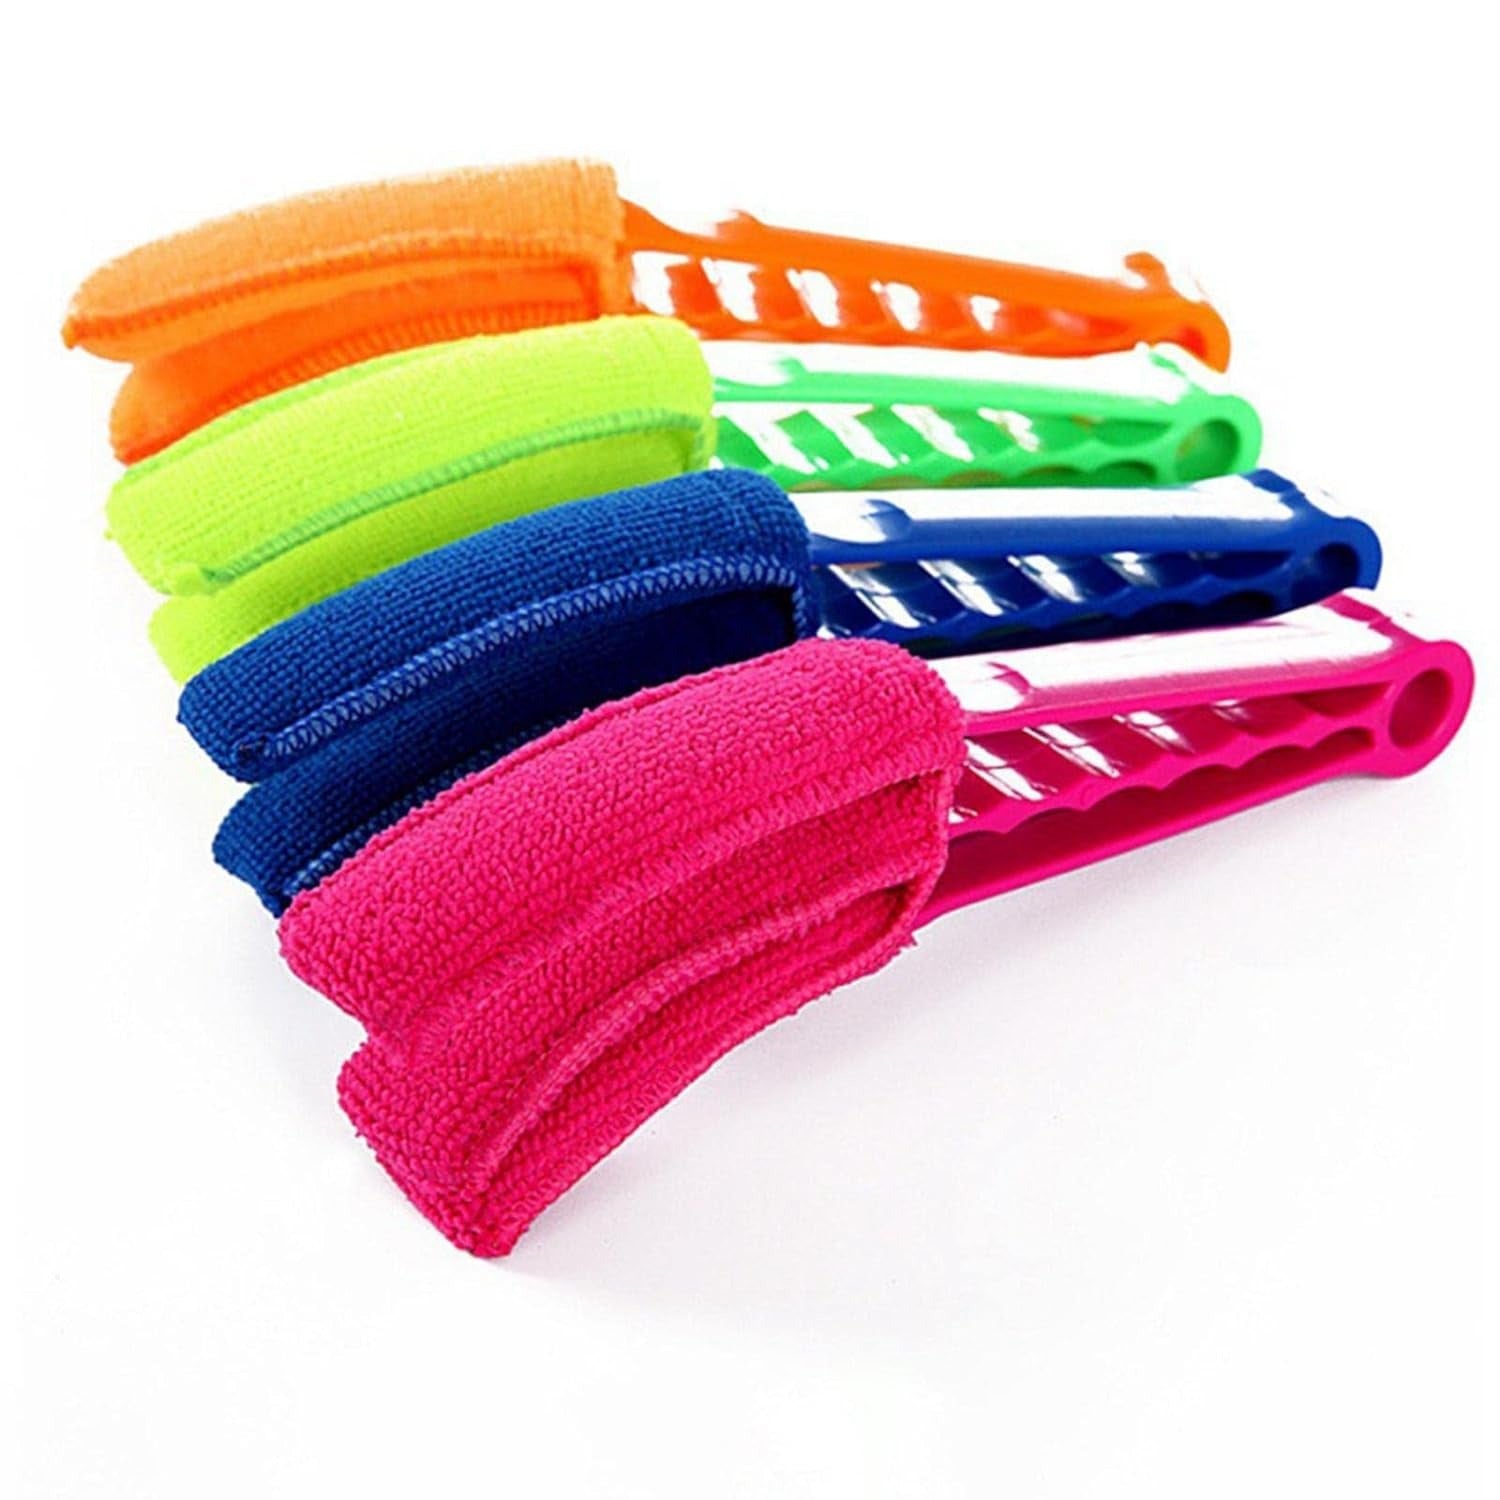 4 different colors of Microfiber Window Blinds Brush